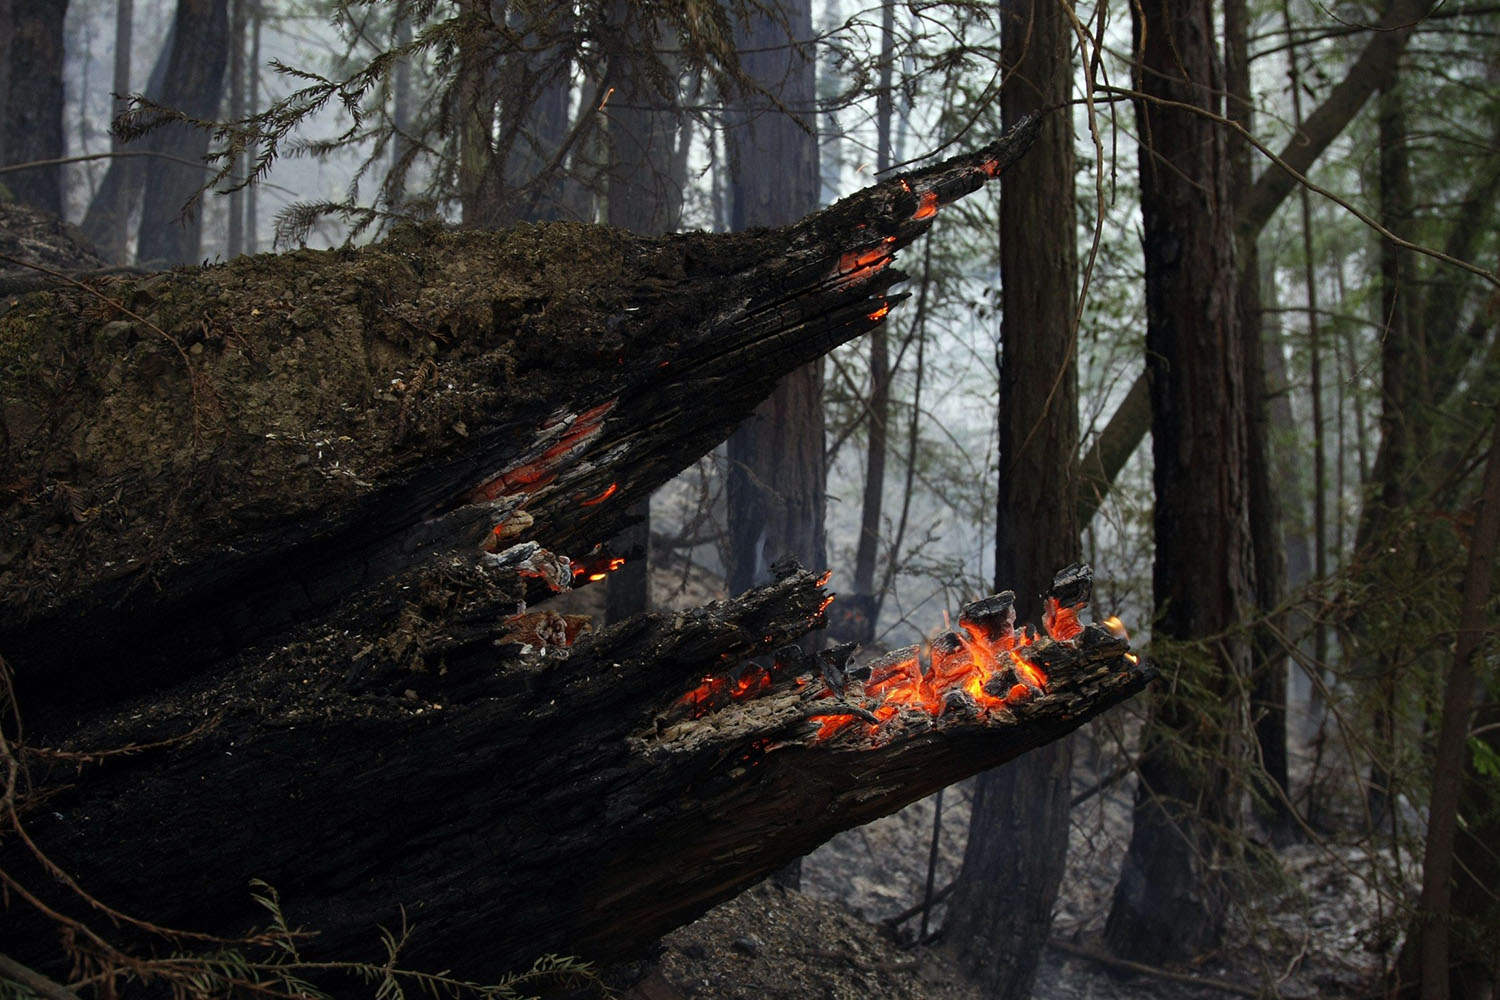 A tree smoulders in an area that burned down to Highway 1 during a wild fire in Big Sur